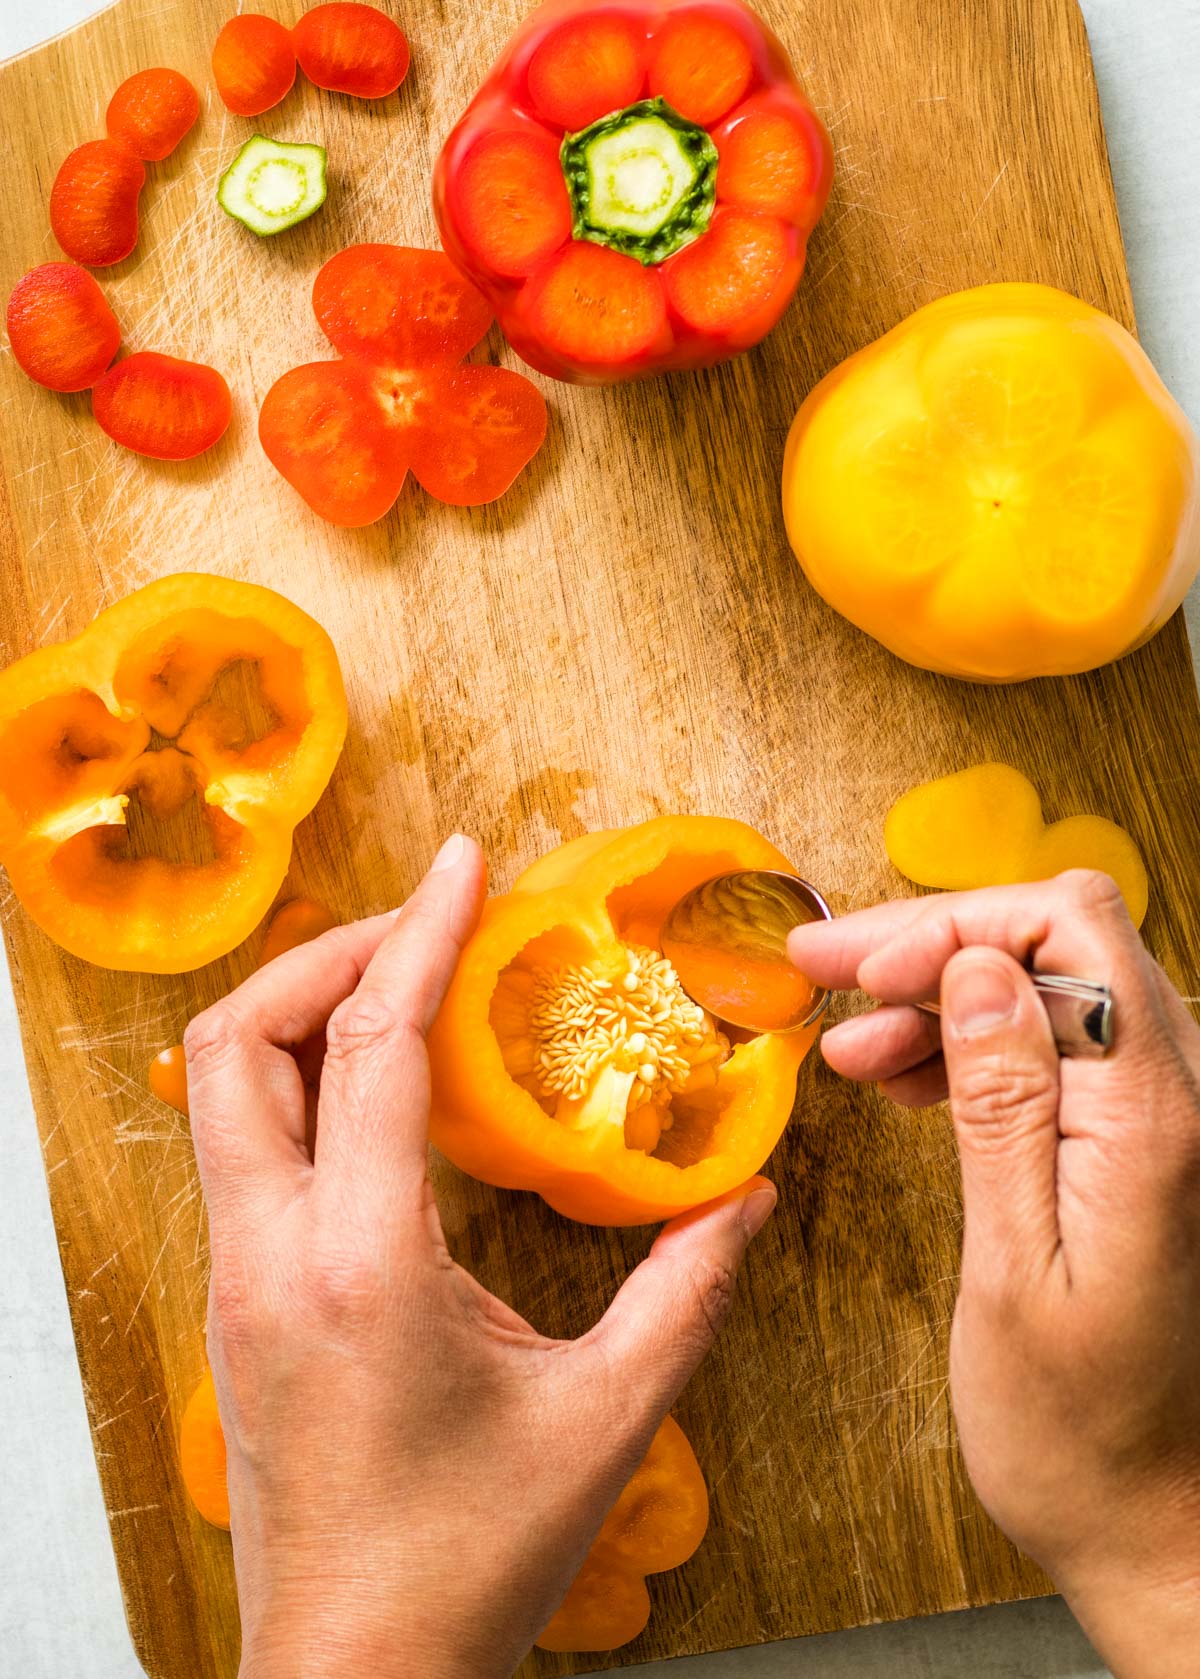 Use a spoon to scrape out the seeds and pulp from red and orange bell peppers.